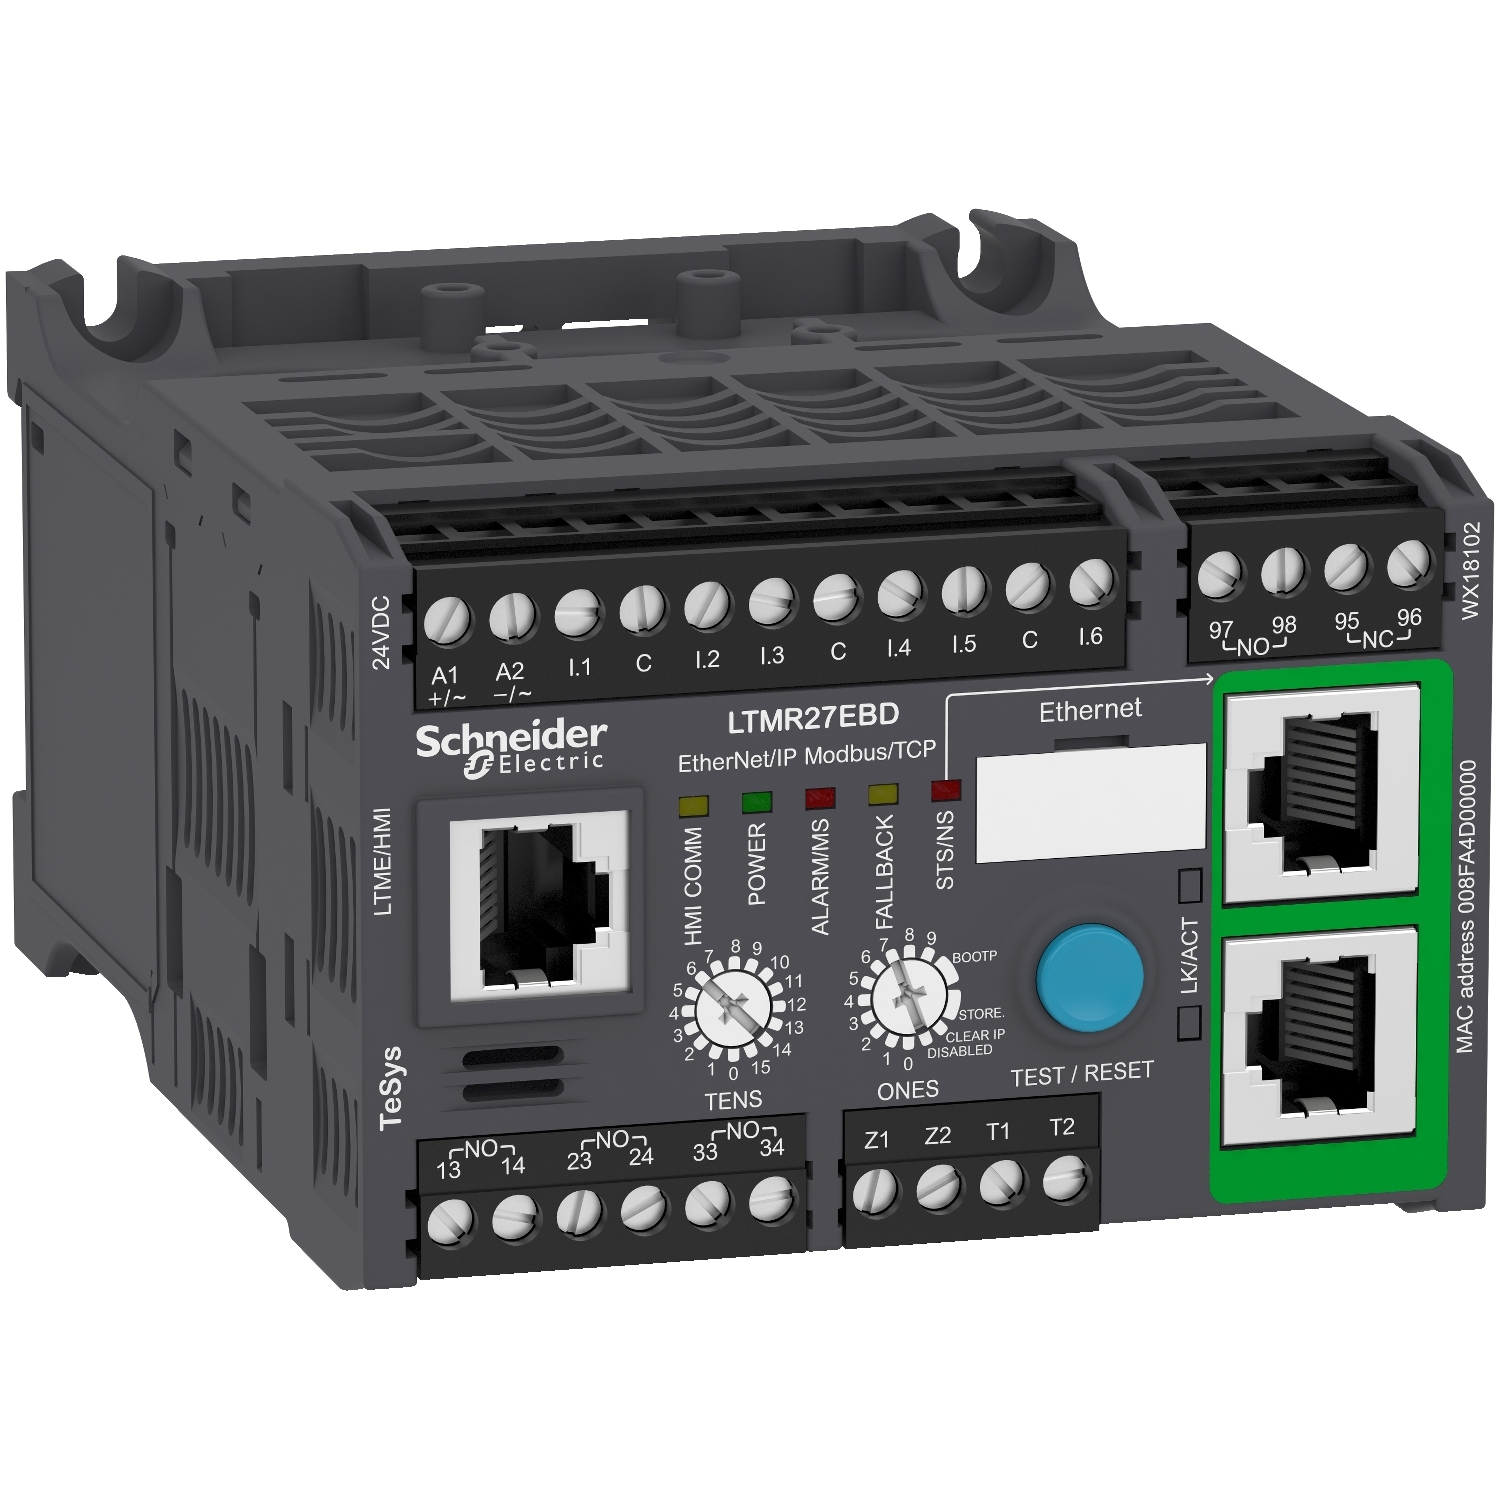 Motor controller, TeSys T, Motor Management, Ethernet/IP, Modbus/TCP, 6 inputs, 3 logic outputs, 1.35A to 27A, 24VDC